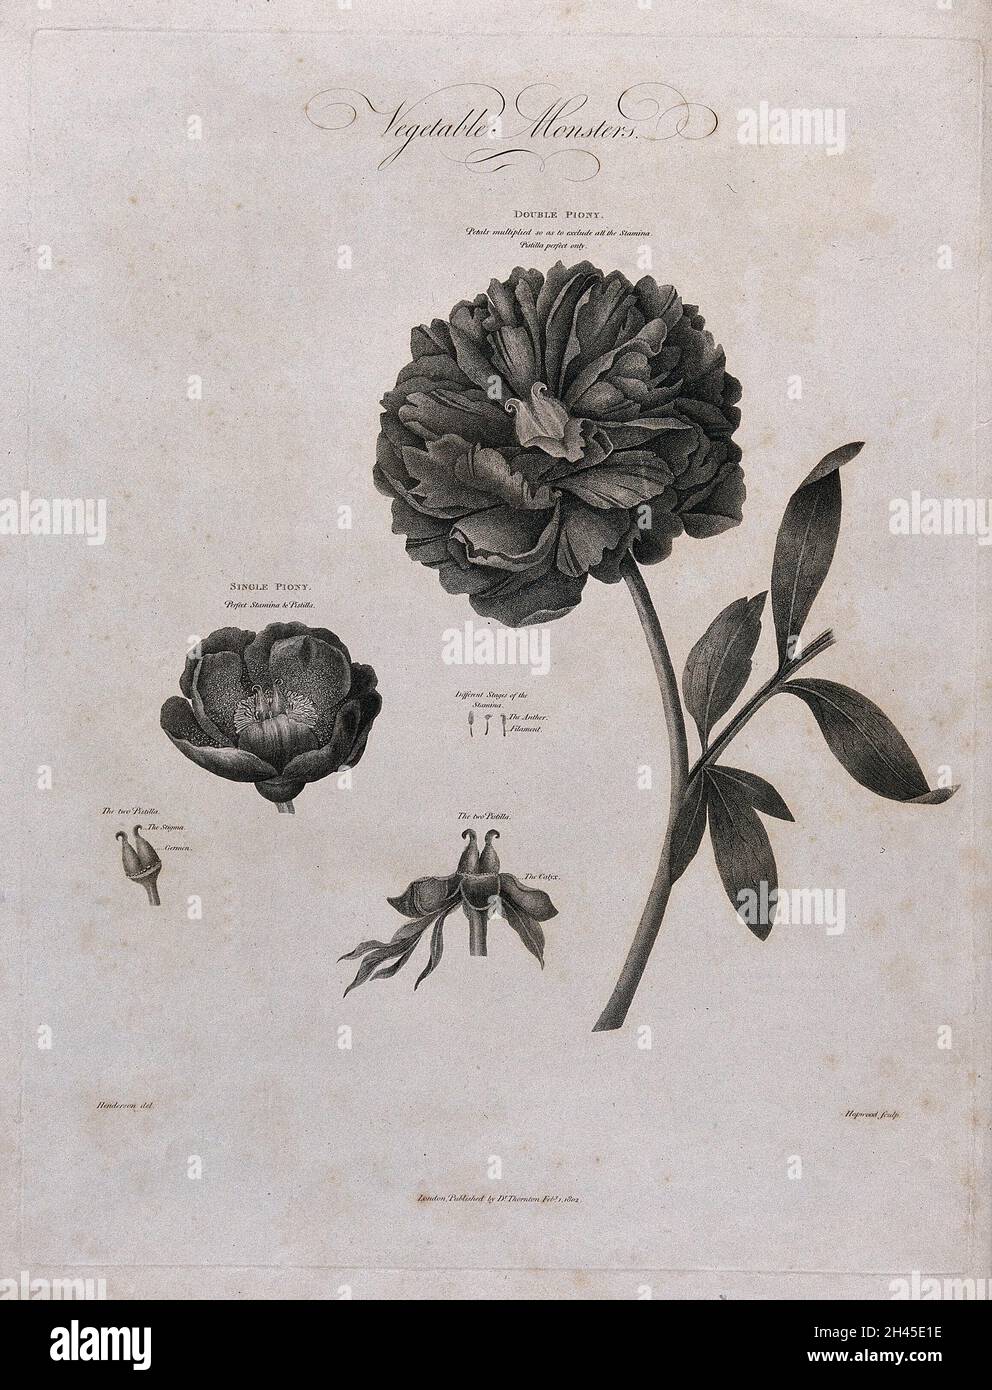 Double and single paeony (Paeonia sp.): flowering stem of the double peony with a separate single paeony flower and floral segments. Engraving by Hopwood, c.1802, after P.Henderson. Stock Photo